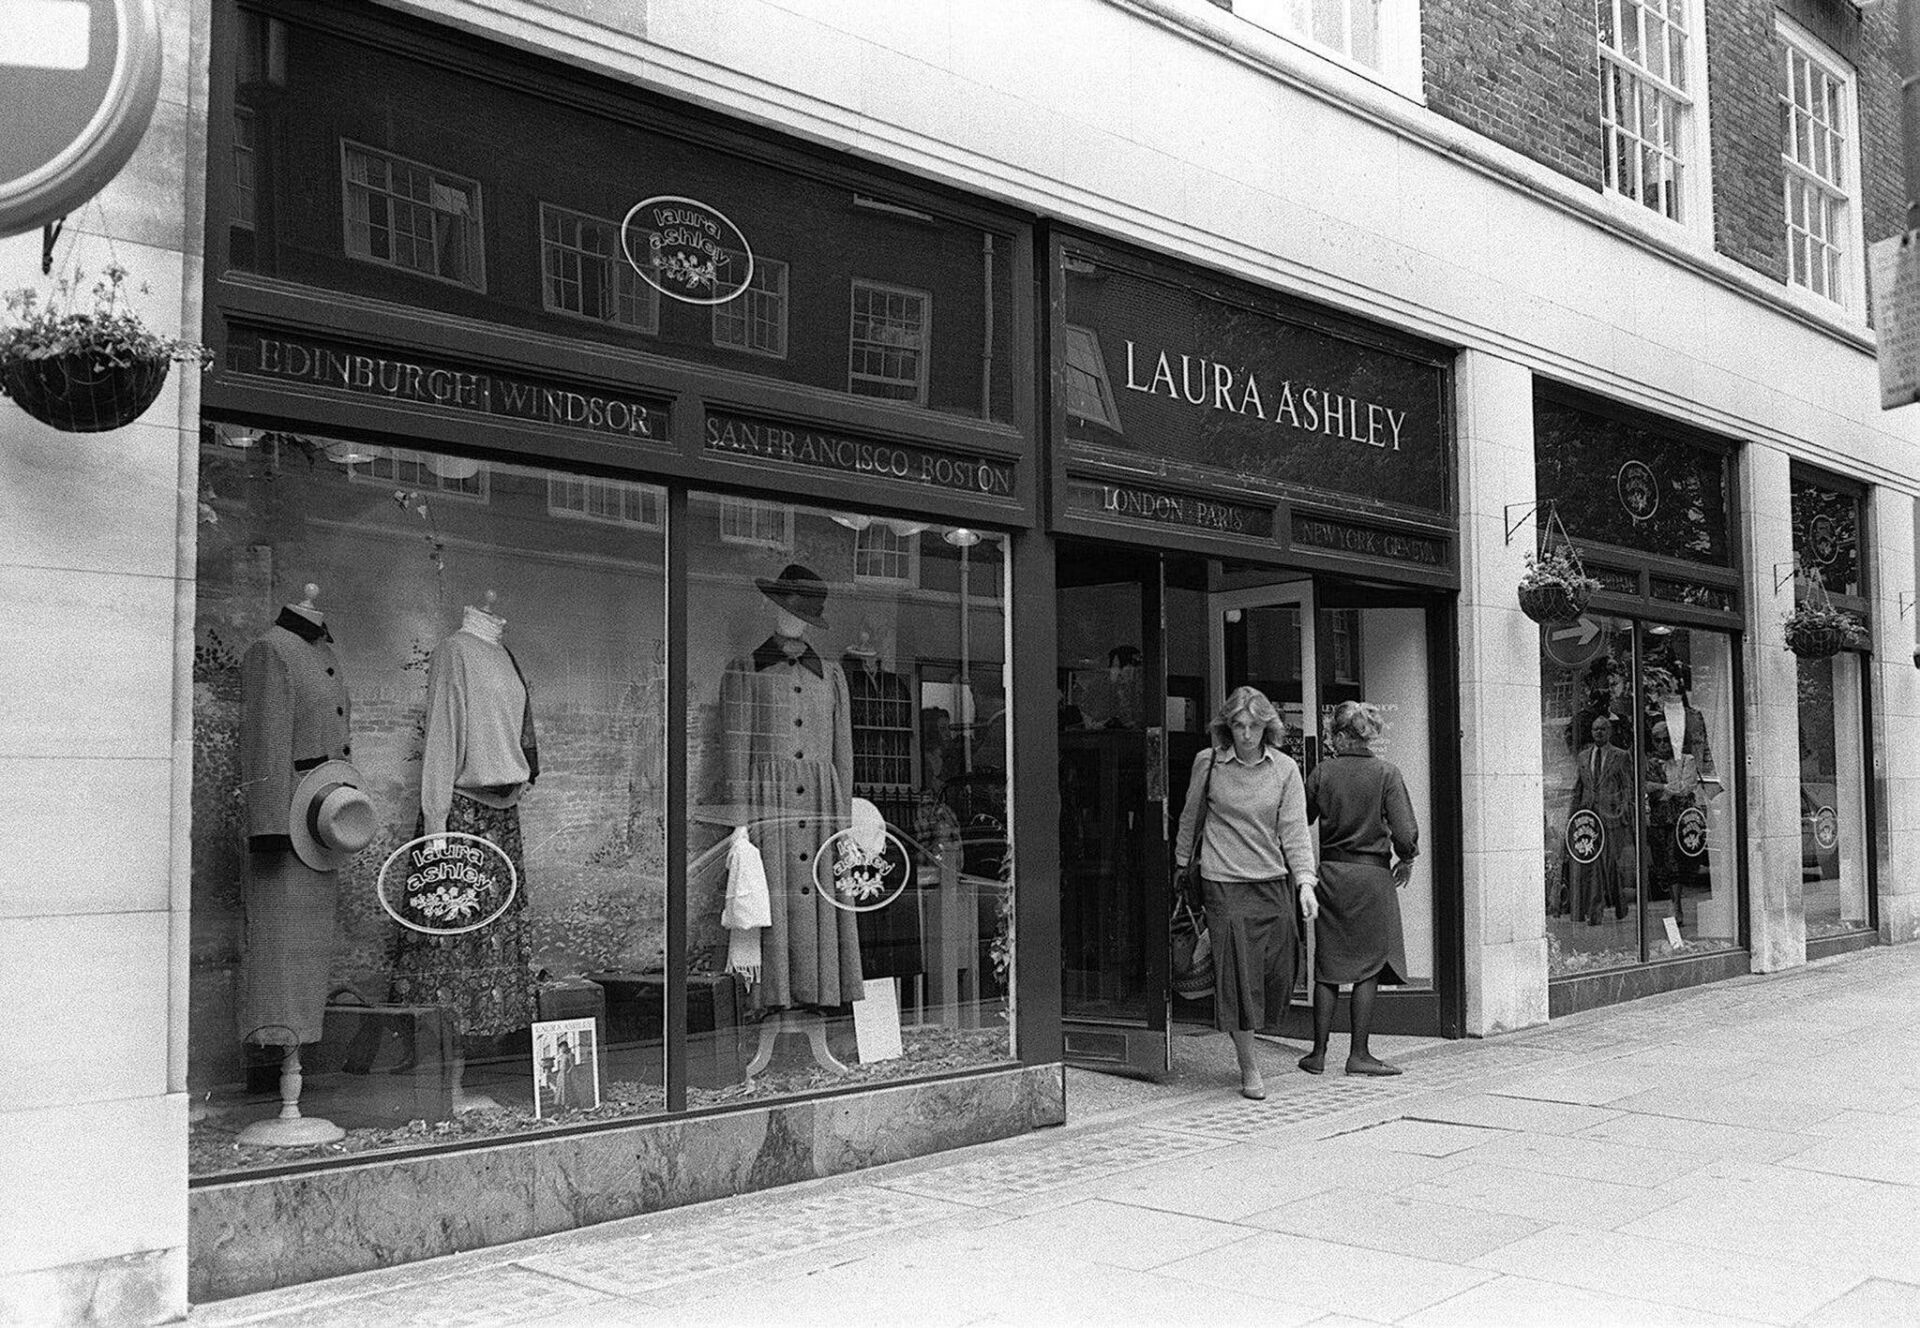 A LOOK BACK AT LAURA ASHLEY'S DECADES OF TIMELESS STYLE